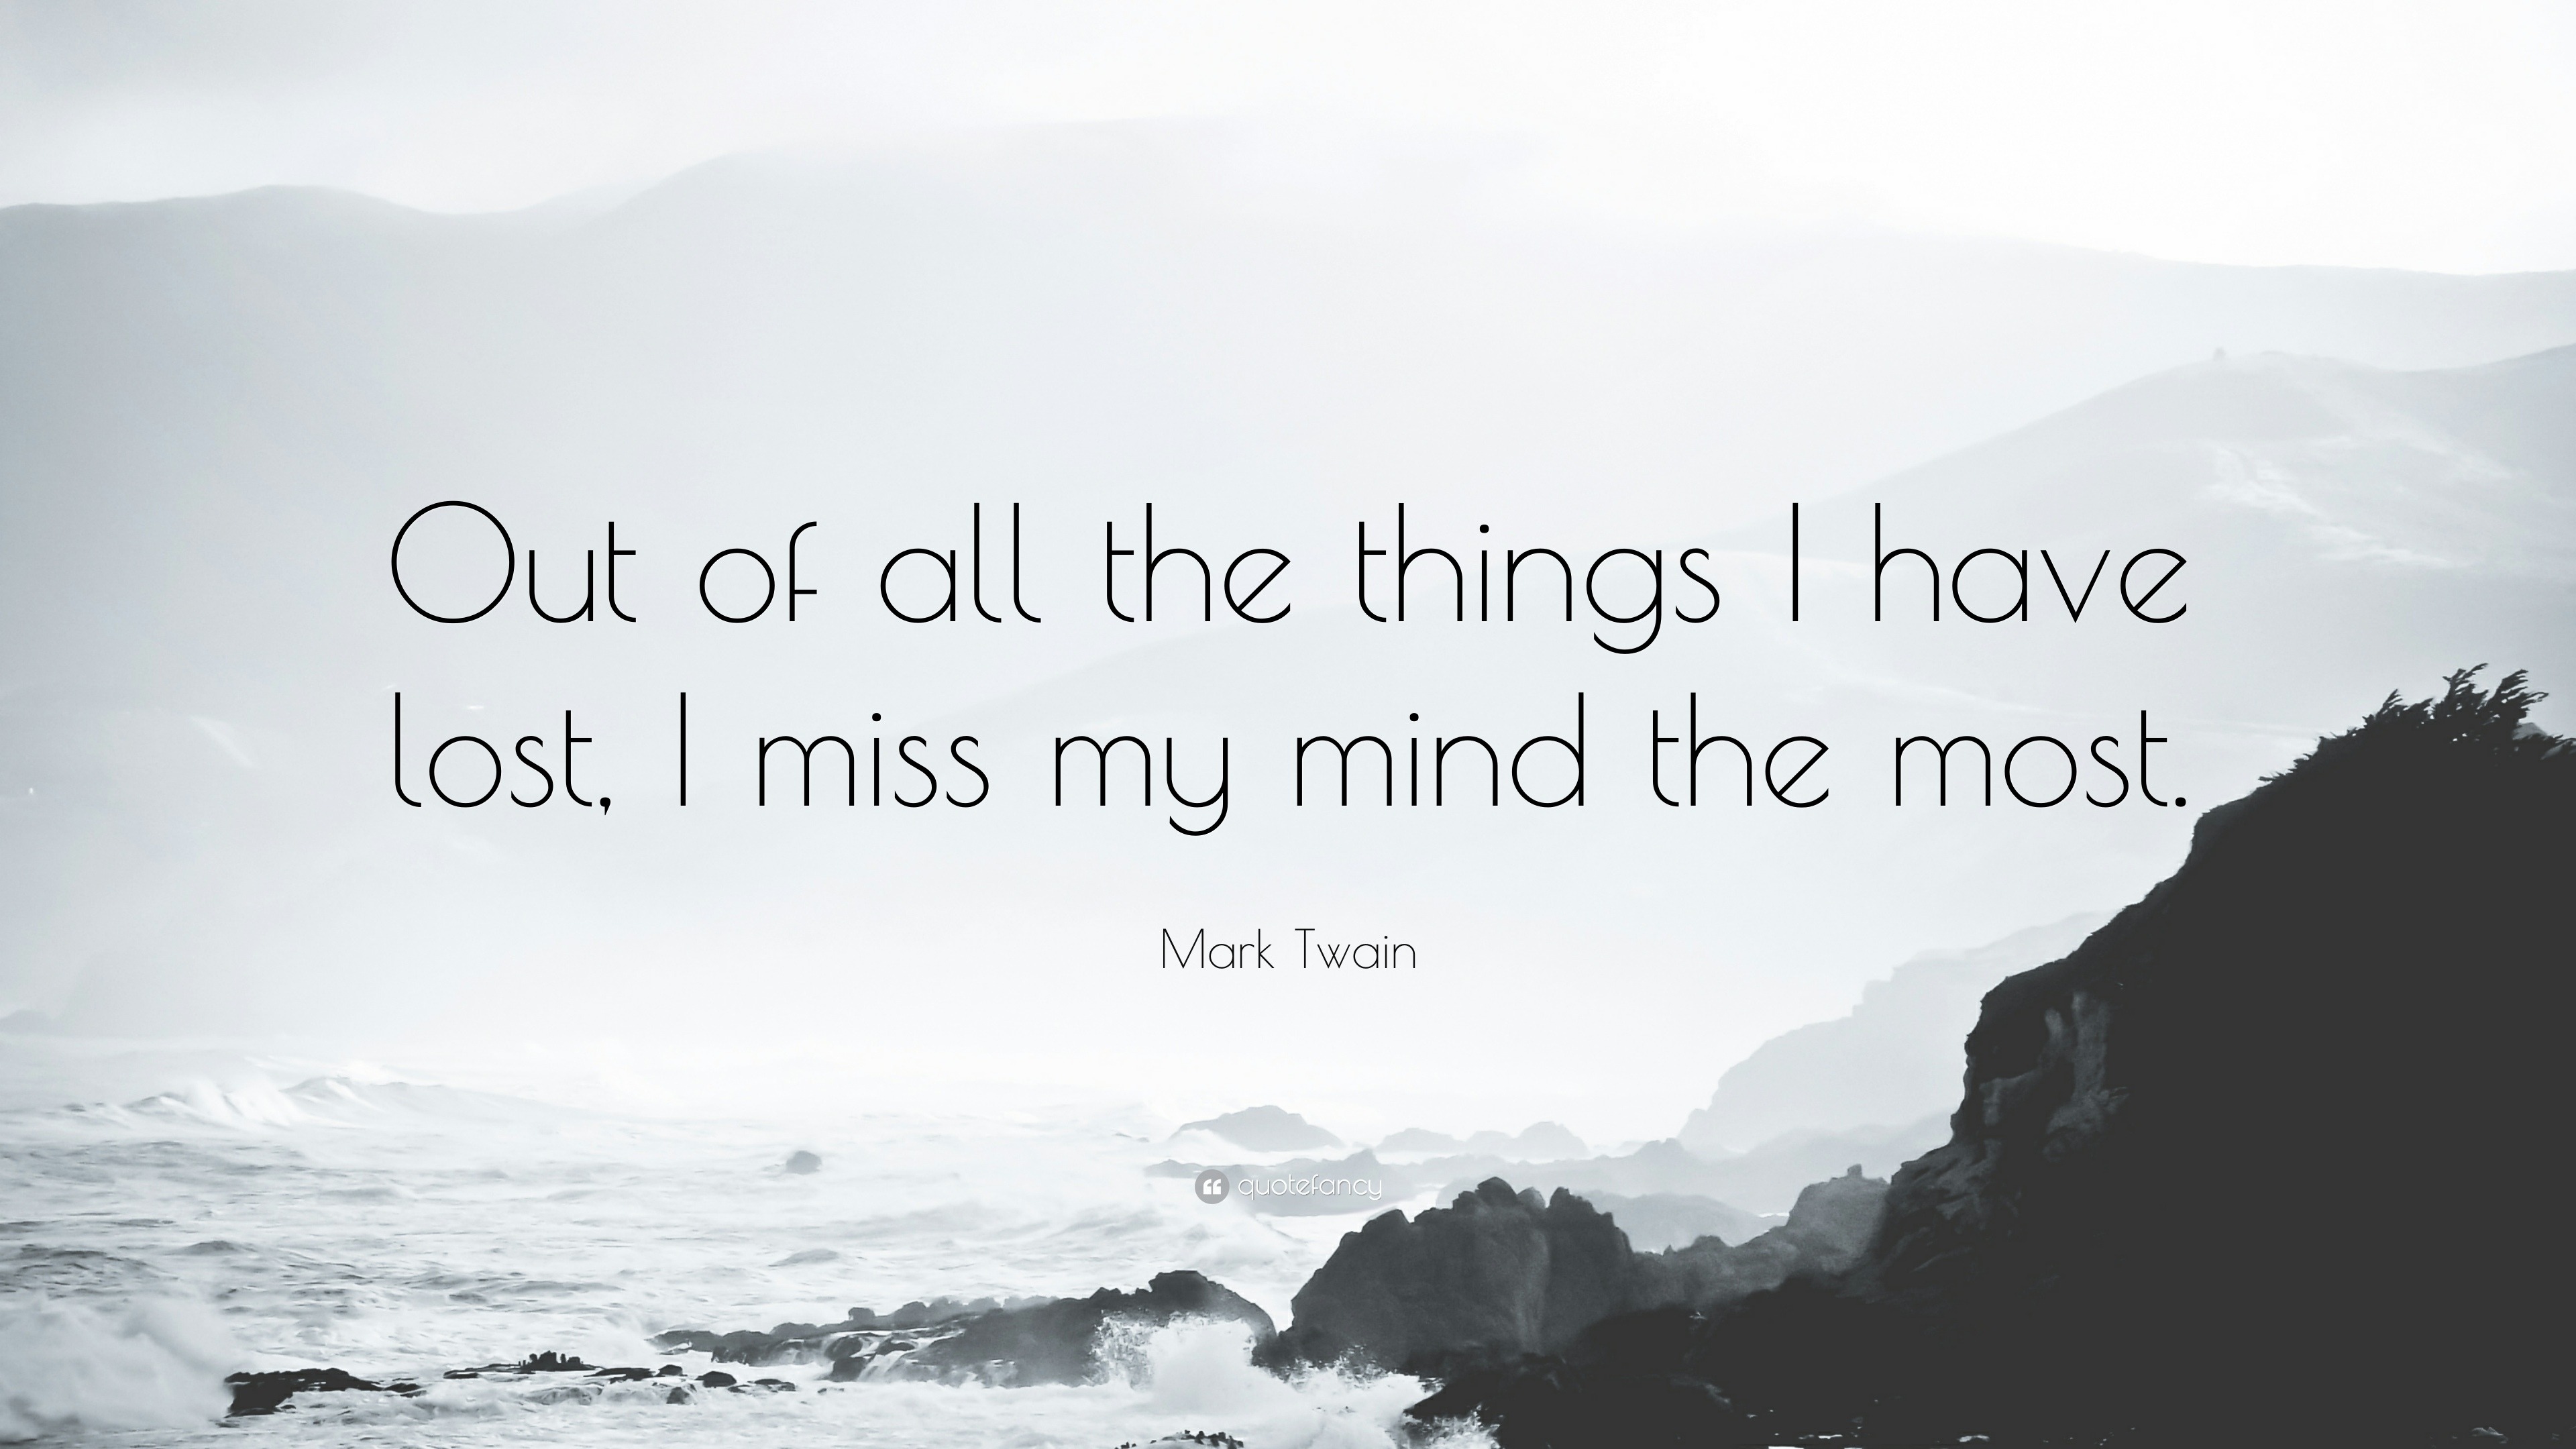 Mark Twain Quote: “Out of all the things I have lost, I miss my mind the